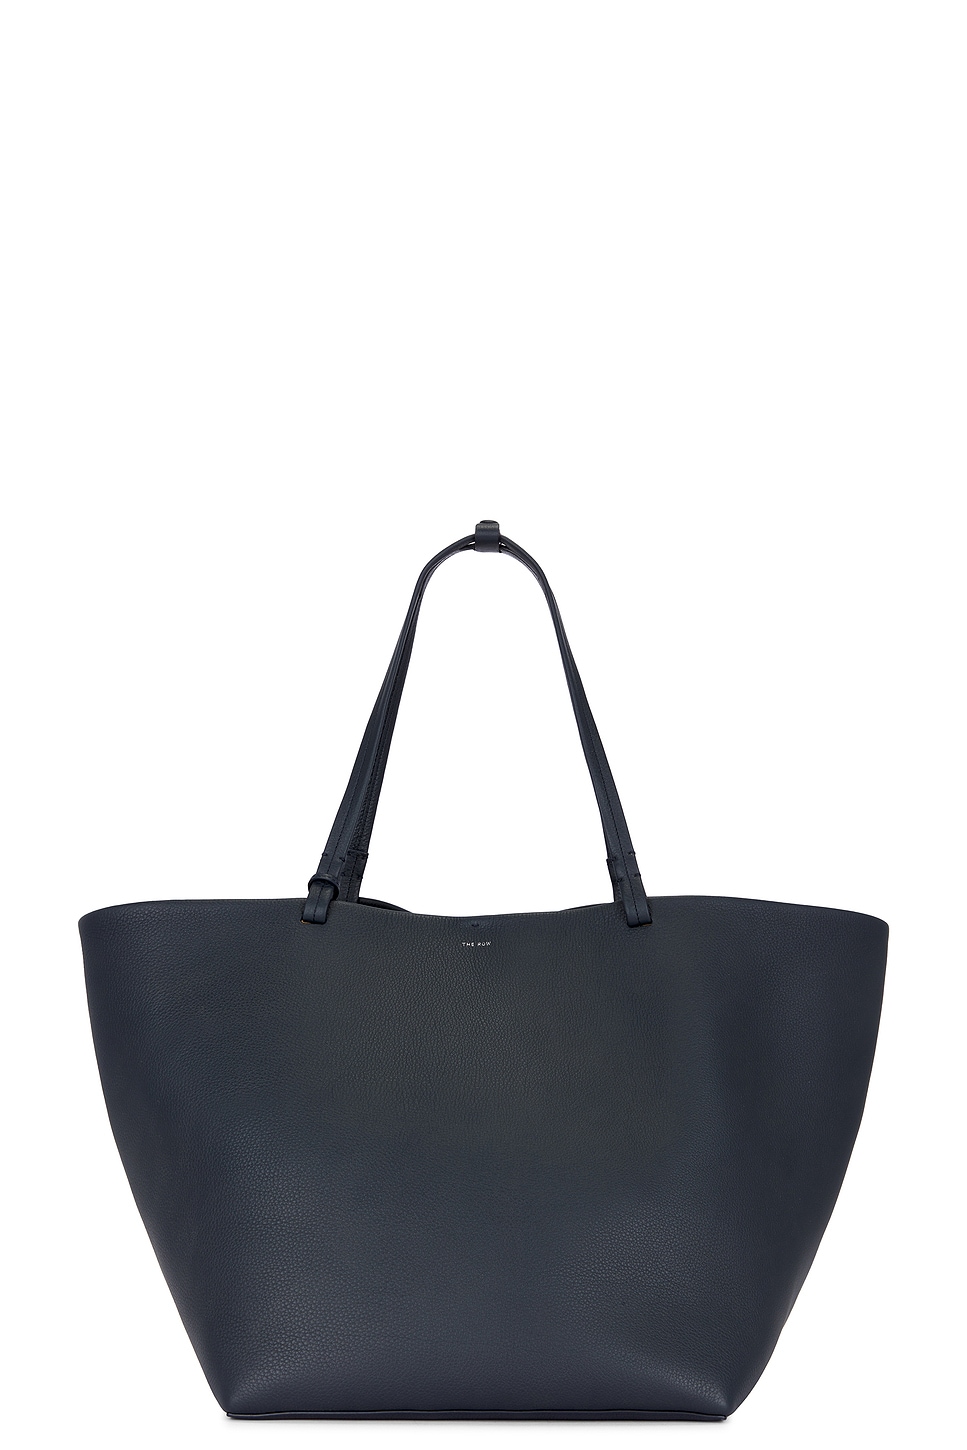 XL Park Tote in Navy